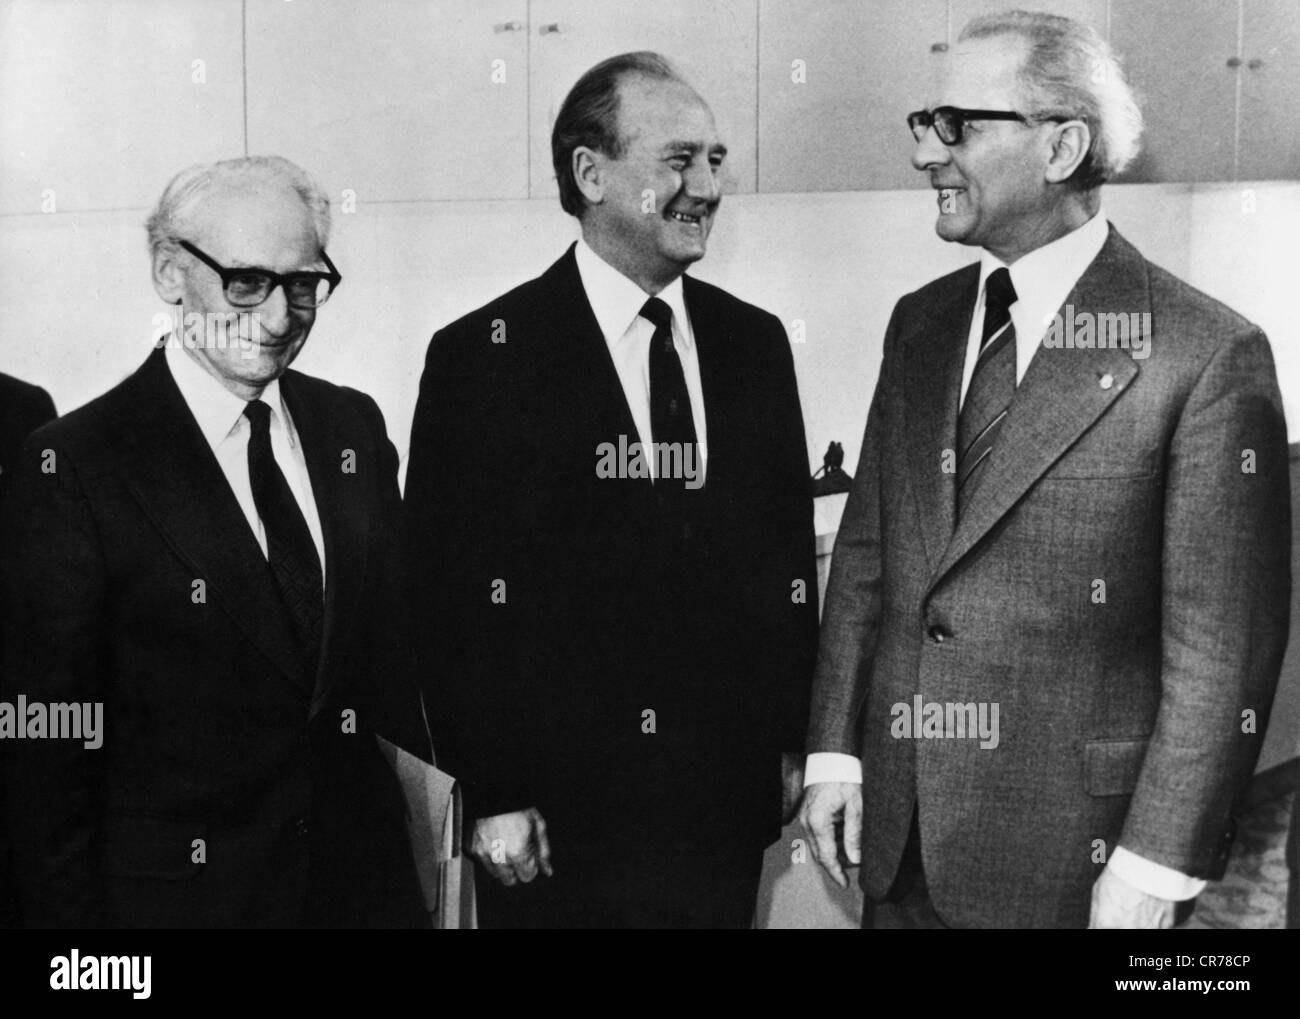 McLennan, Gordon, * 12.5.1924, British politician (CPGB), General Secretary of the Communist Party of Great Britain 1976 - 1989, visit to East Germany, with Jack Woddis and, Stock Photo